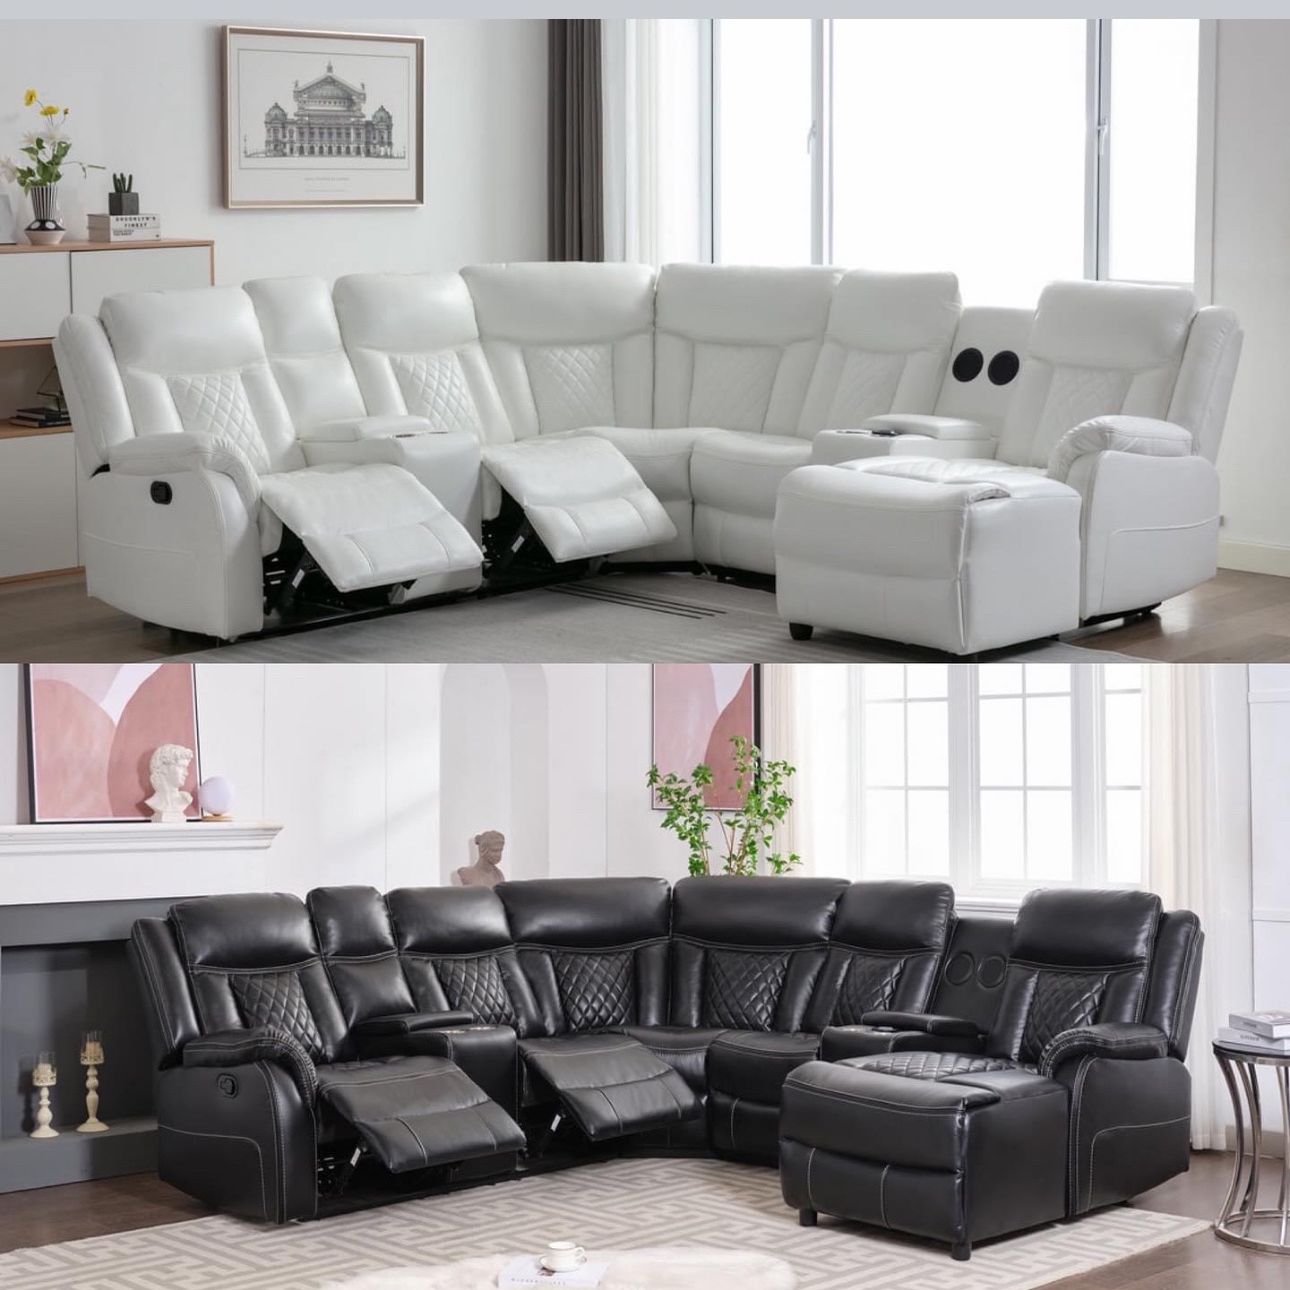 NEW CHAMPION POWER RECLINING SECTIONAL WITH FREE DELIVERY 